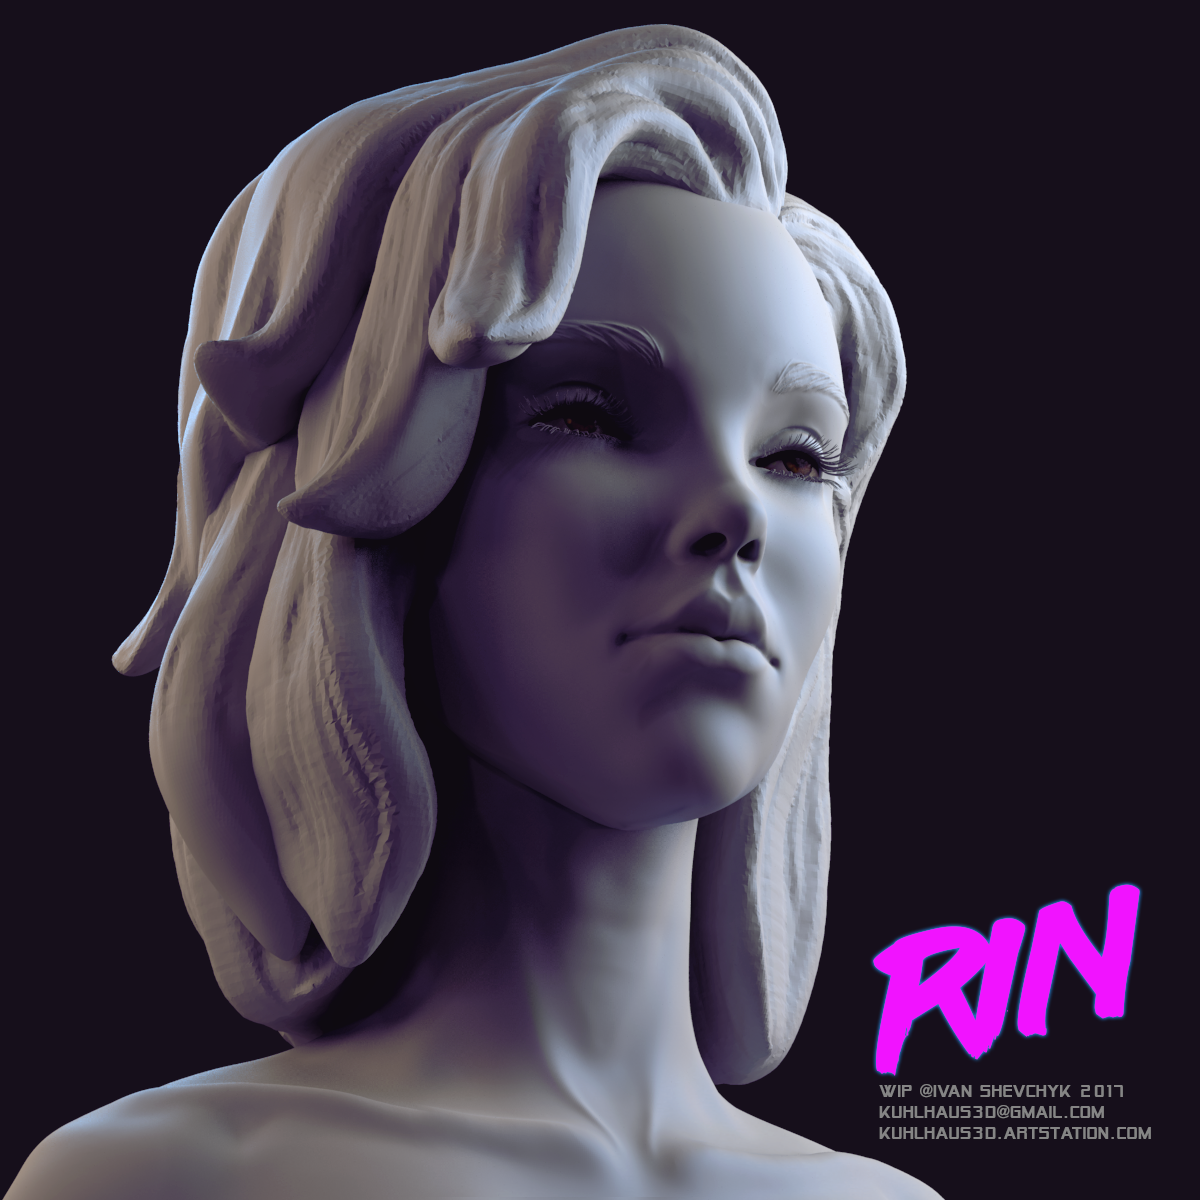 22B_Rin_kuhlhaus3d_00_1200px.png